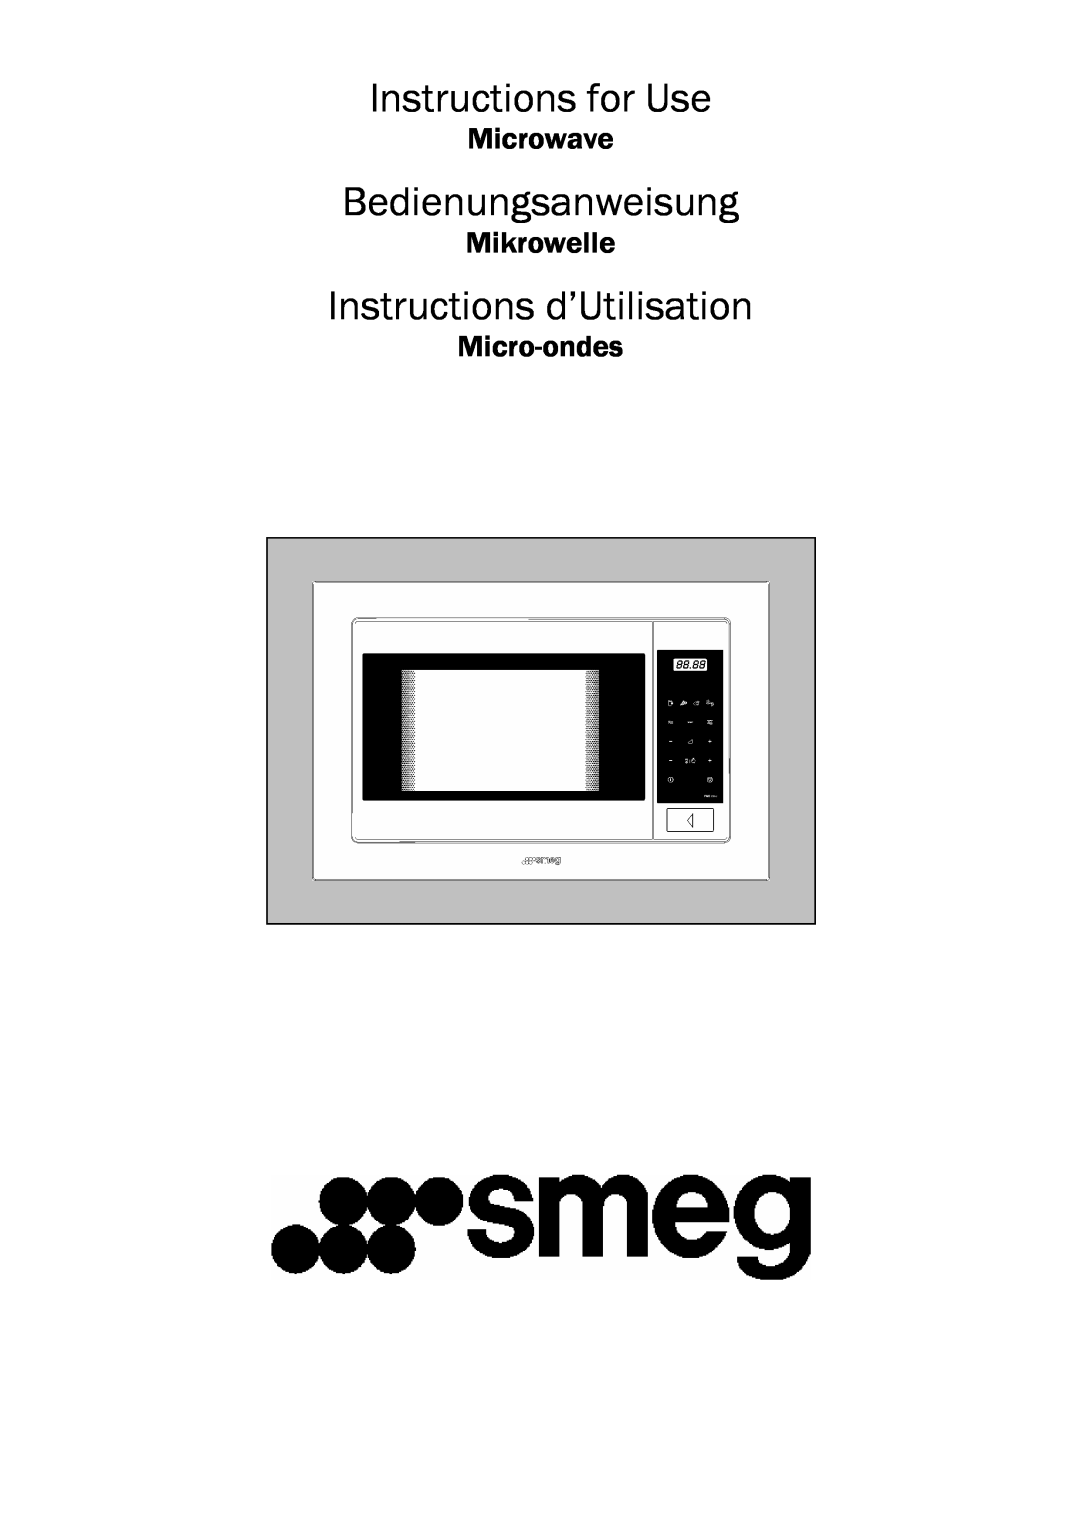 Smeg FME20TC manual Instructions for Use, Bedienungsanweisung, Instructions d’Utilisation, Microwave, Mikrowelle 